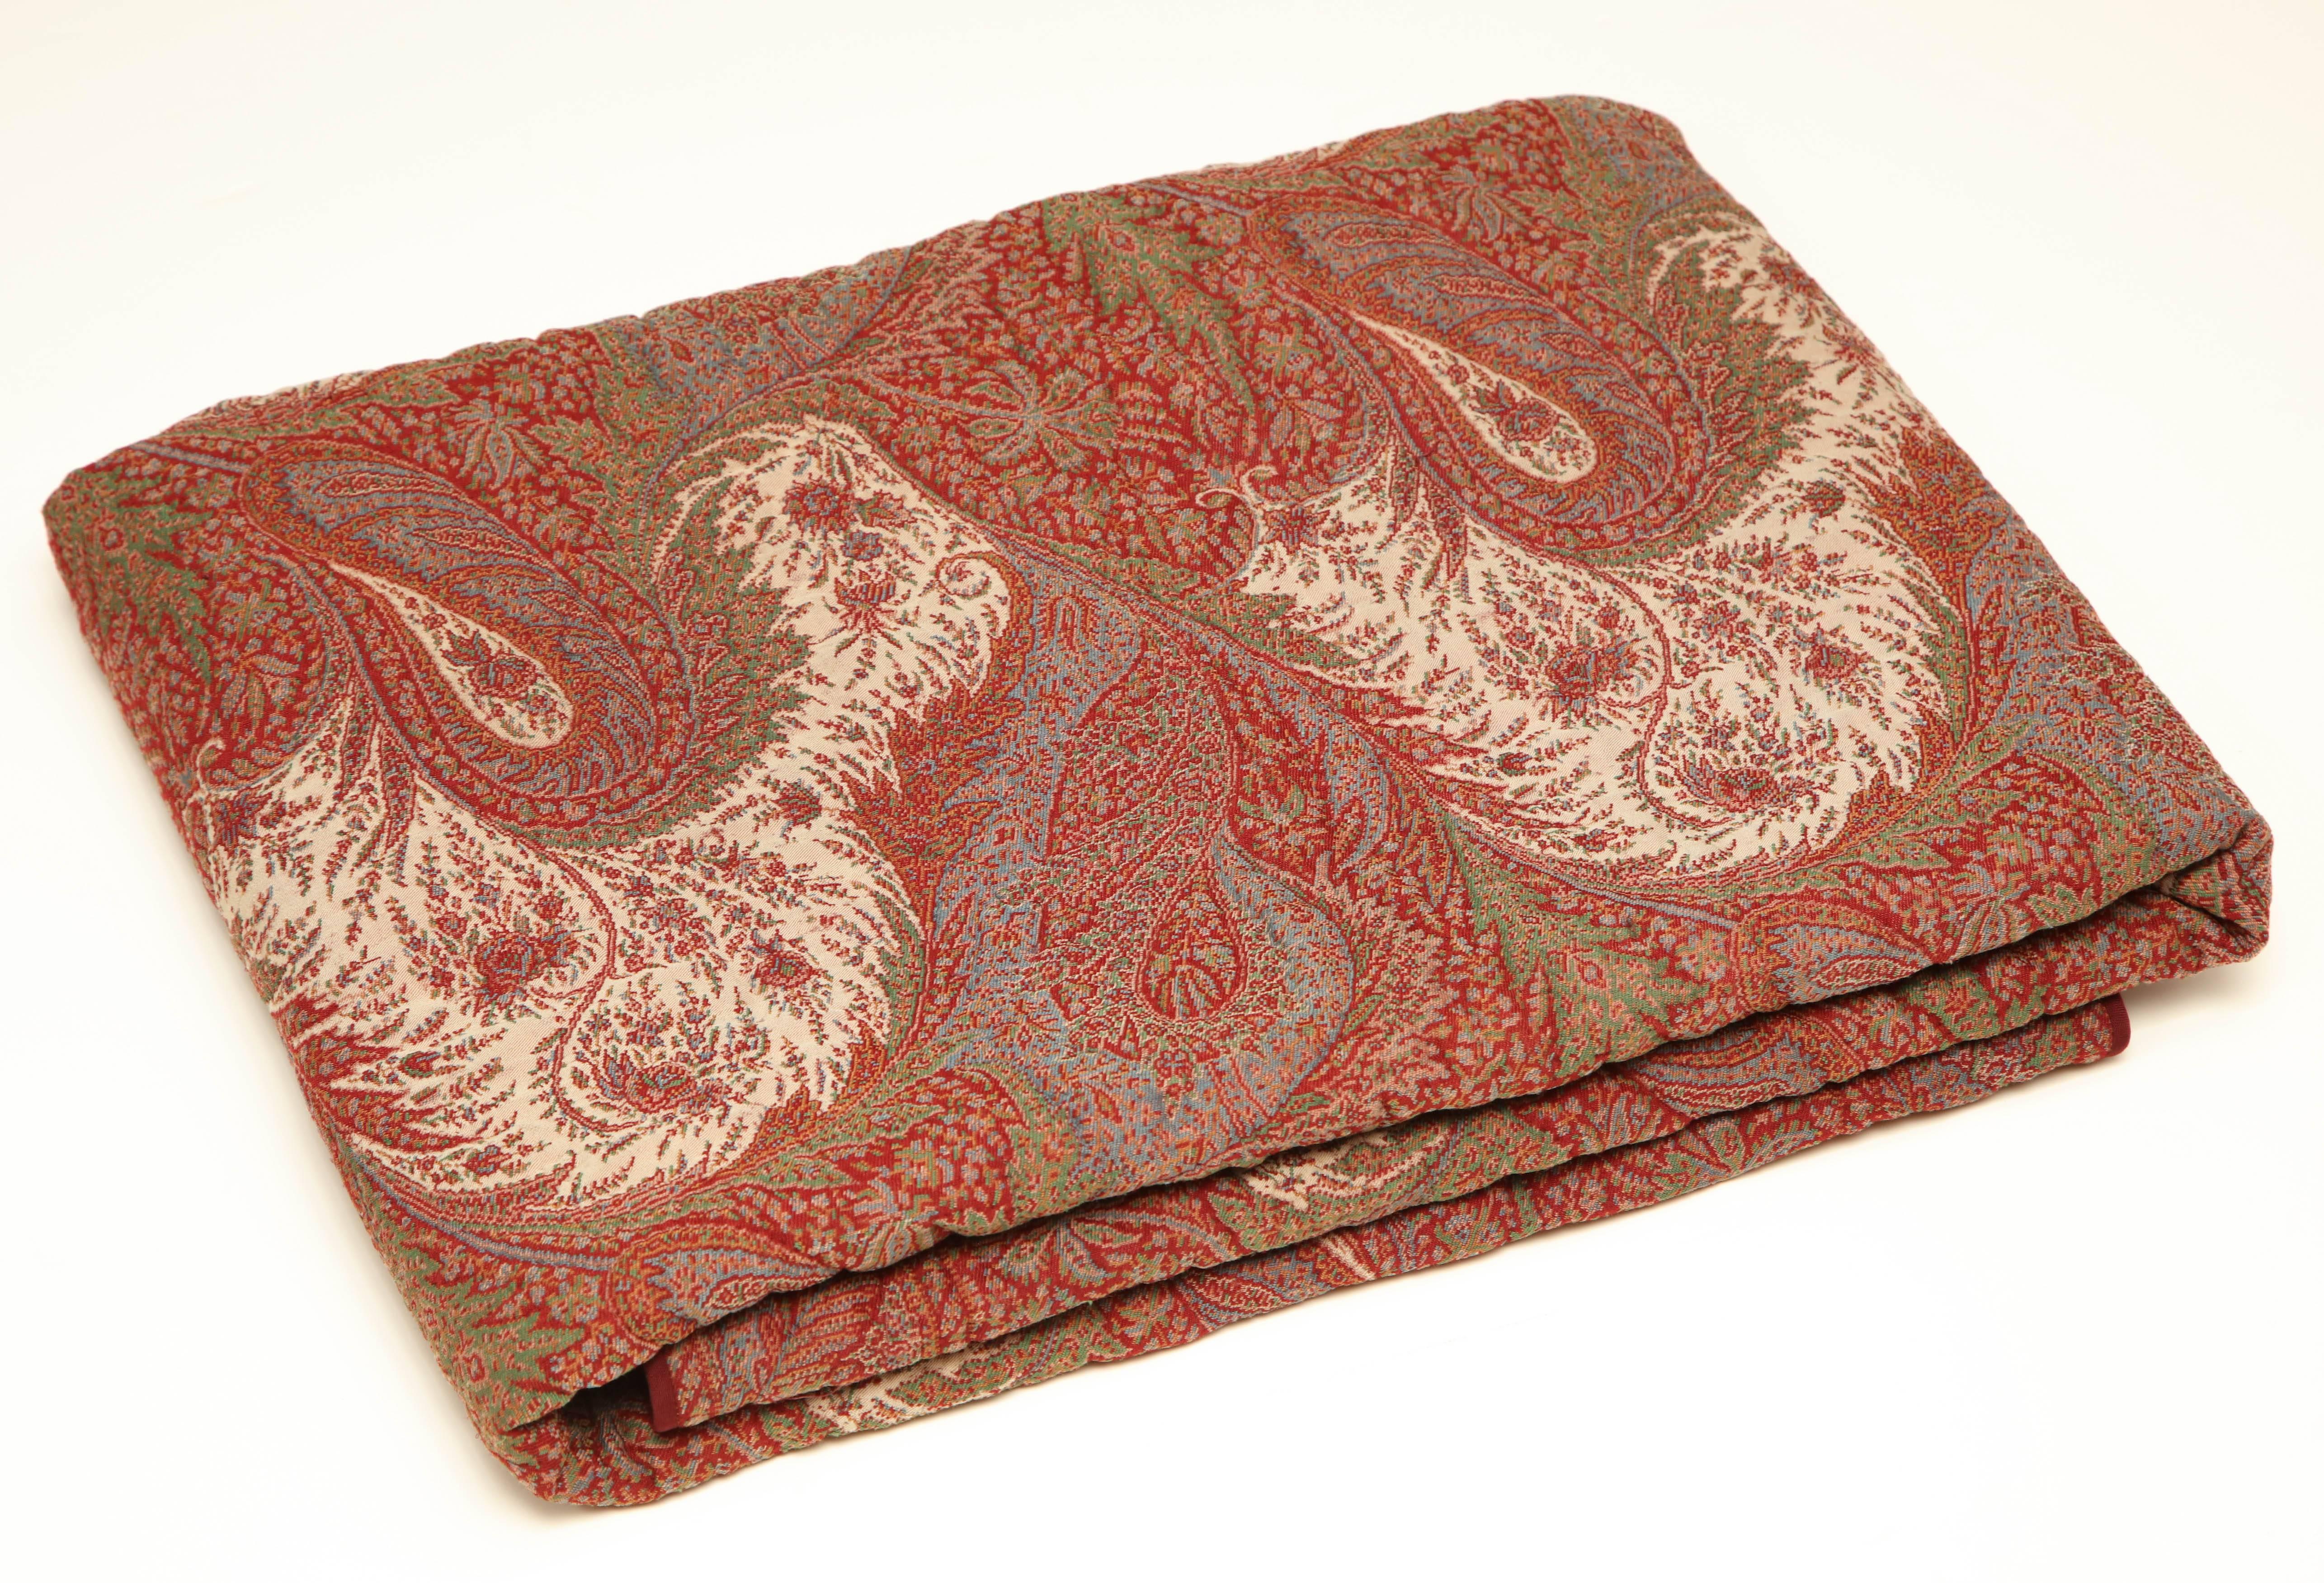 Late 19th century quilted paisley.